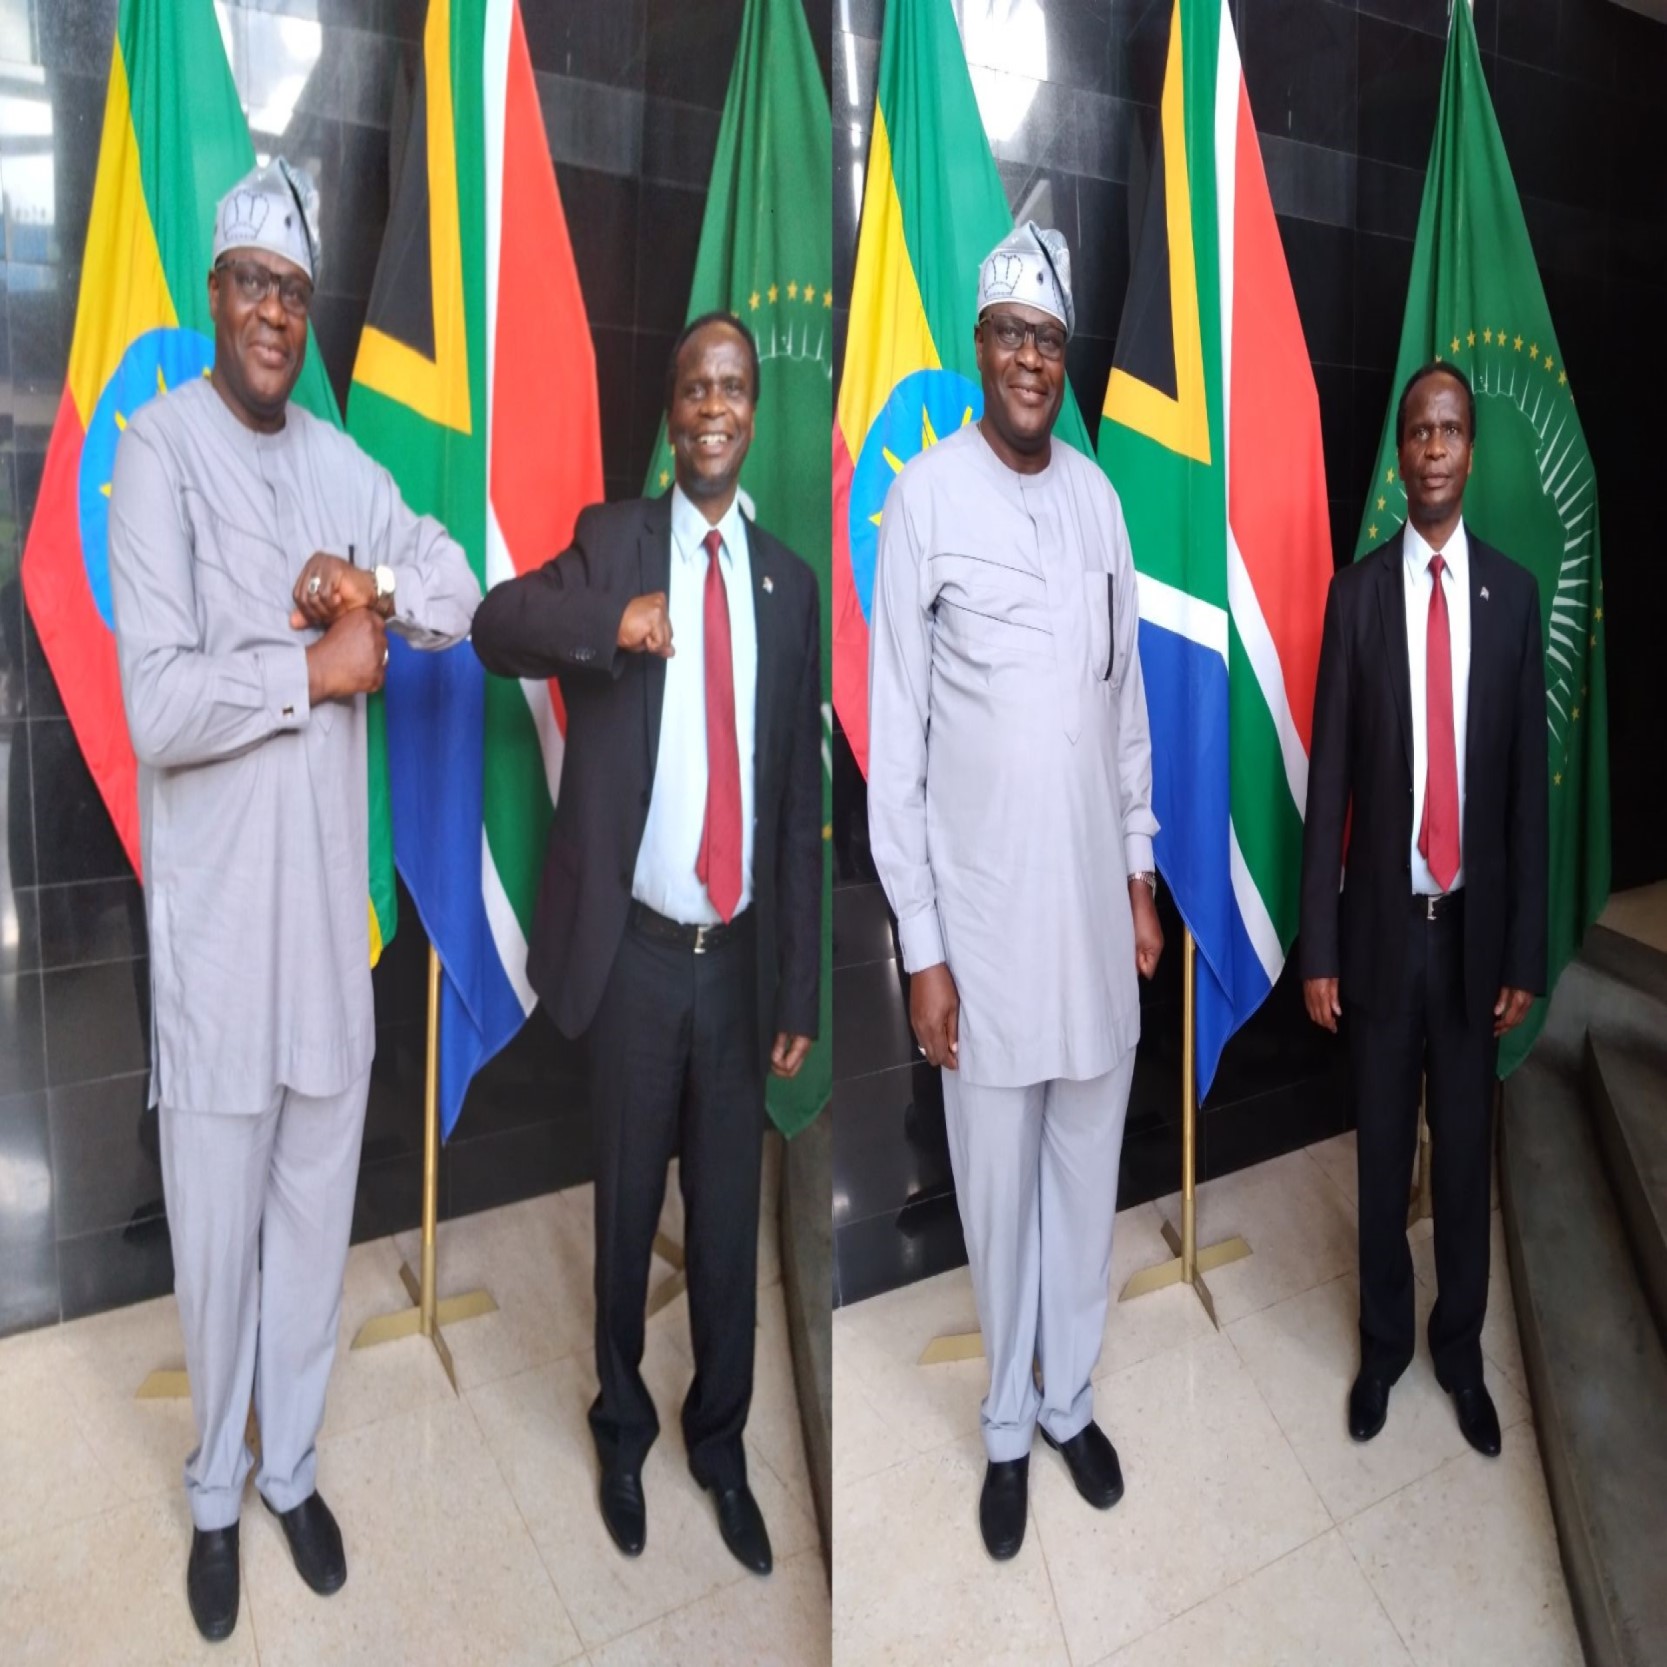 H.E. Xolisa Edward Makaya, Ambassador of the Republic of South Africa to the Federal Democratic Republic of Ethiopia received H.E. Victor Adekunle Adeleke, Ambassador of the Federal Republic of Nigeria to the Federal Democratic Republic of Ethiopia on a courtesy visit on Wednesday, 09 June 2021.